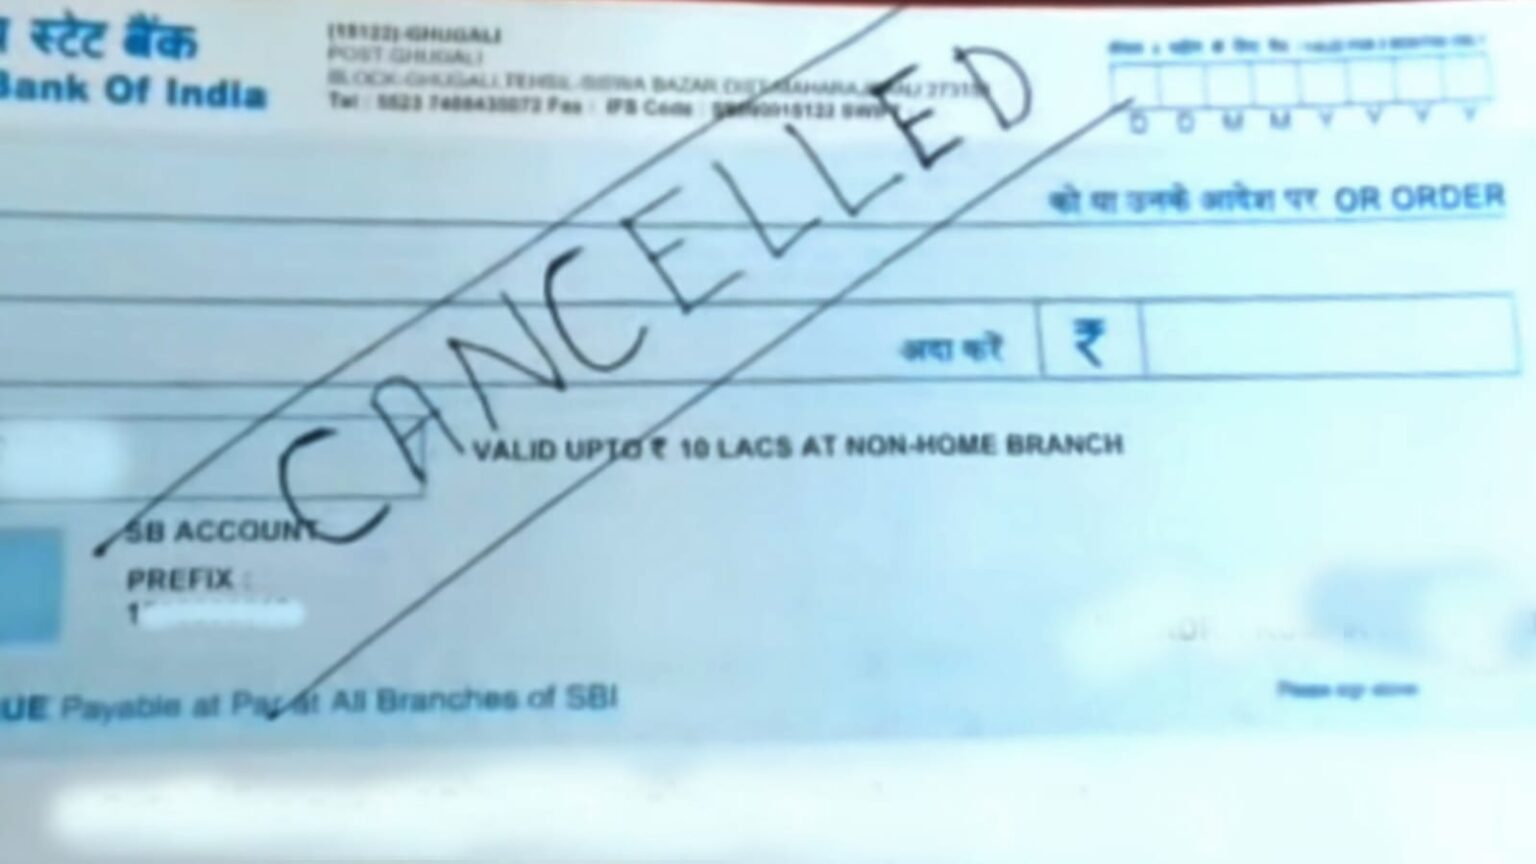 How to Cancel a Cheque Steps for Writing a Canceled Cheque